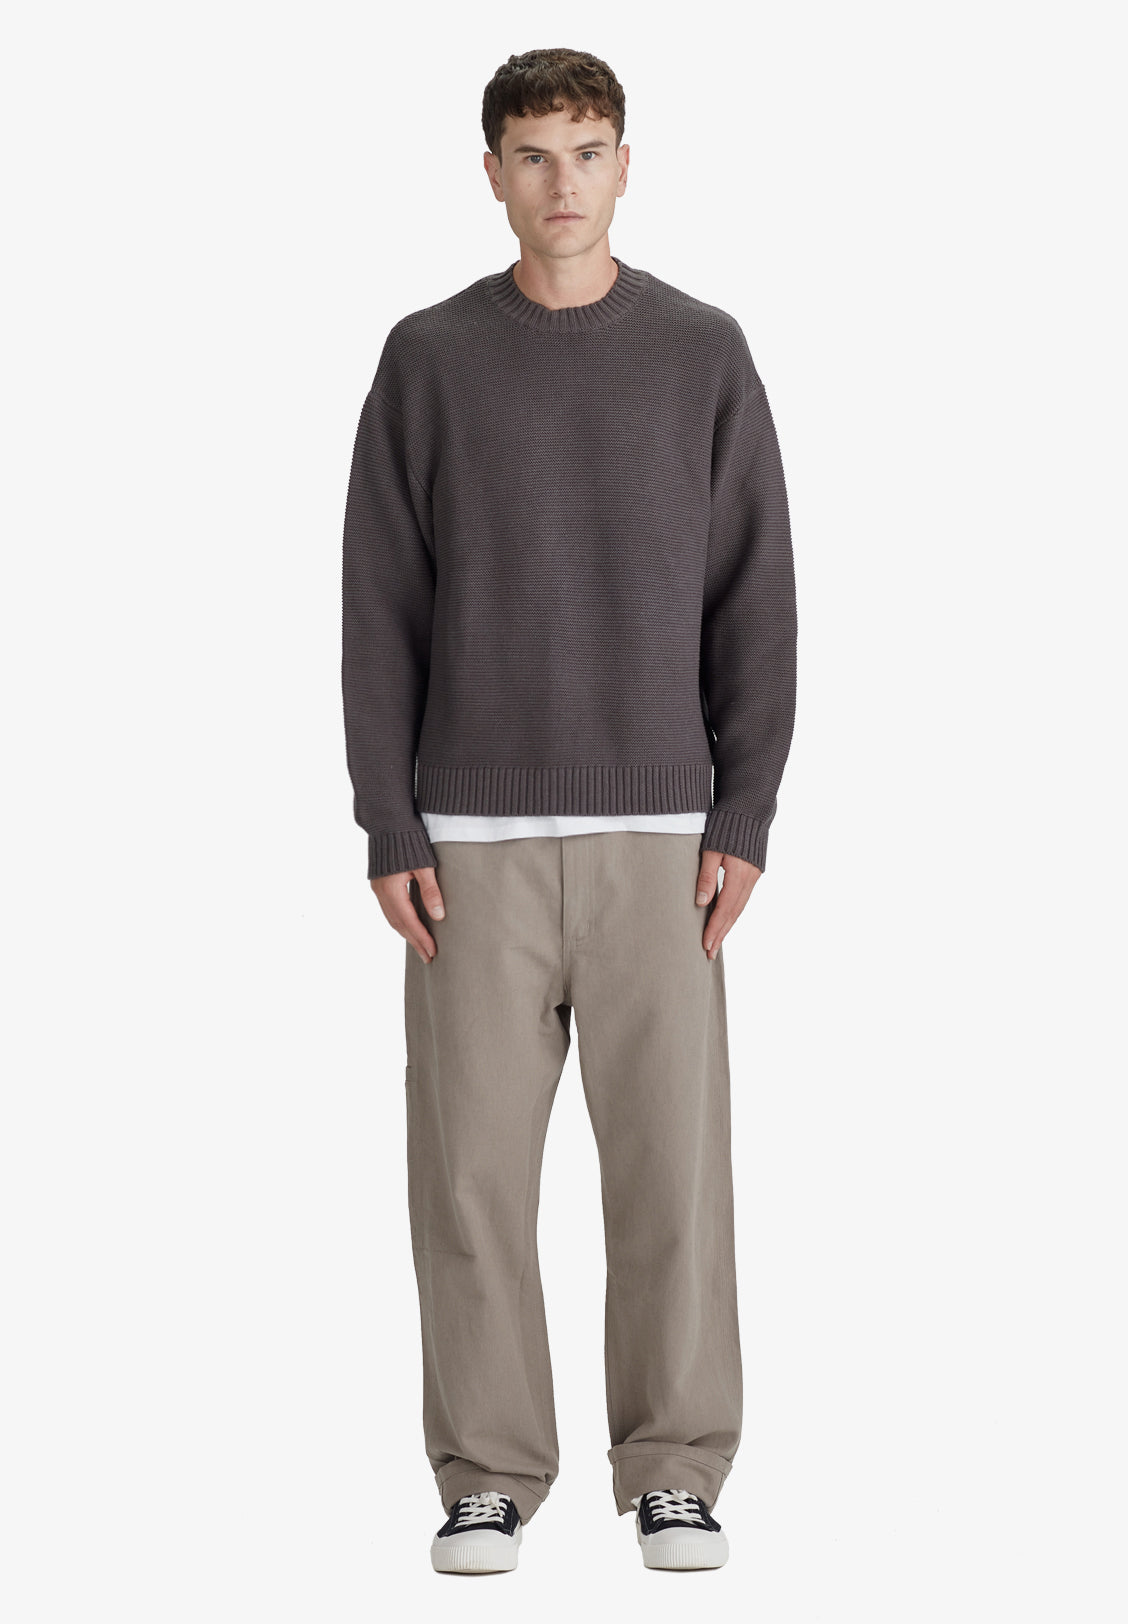 Commoners Oversized Crew Knit - Stormy